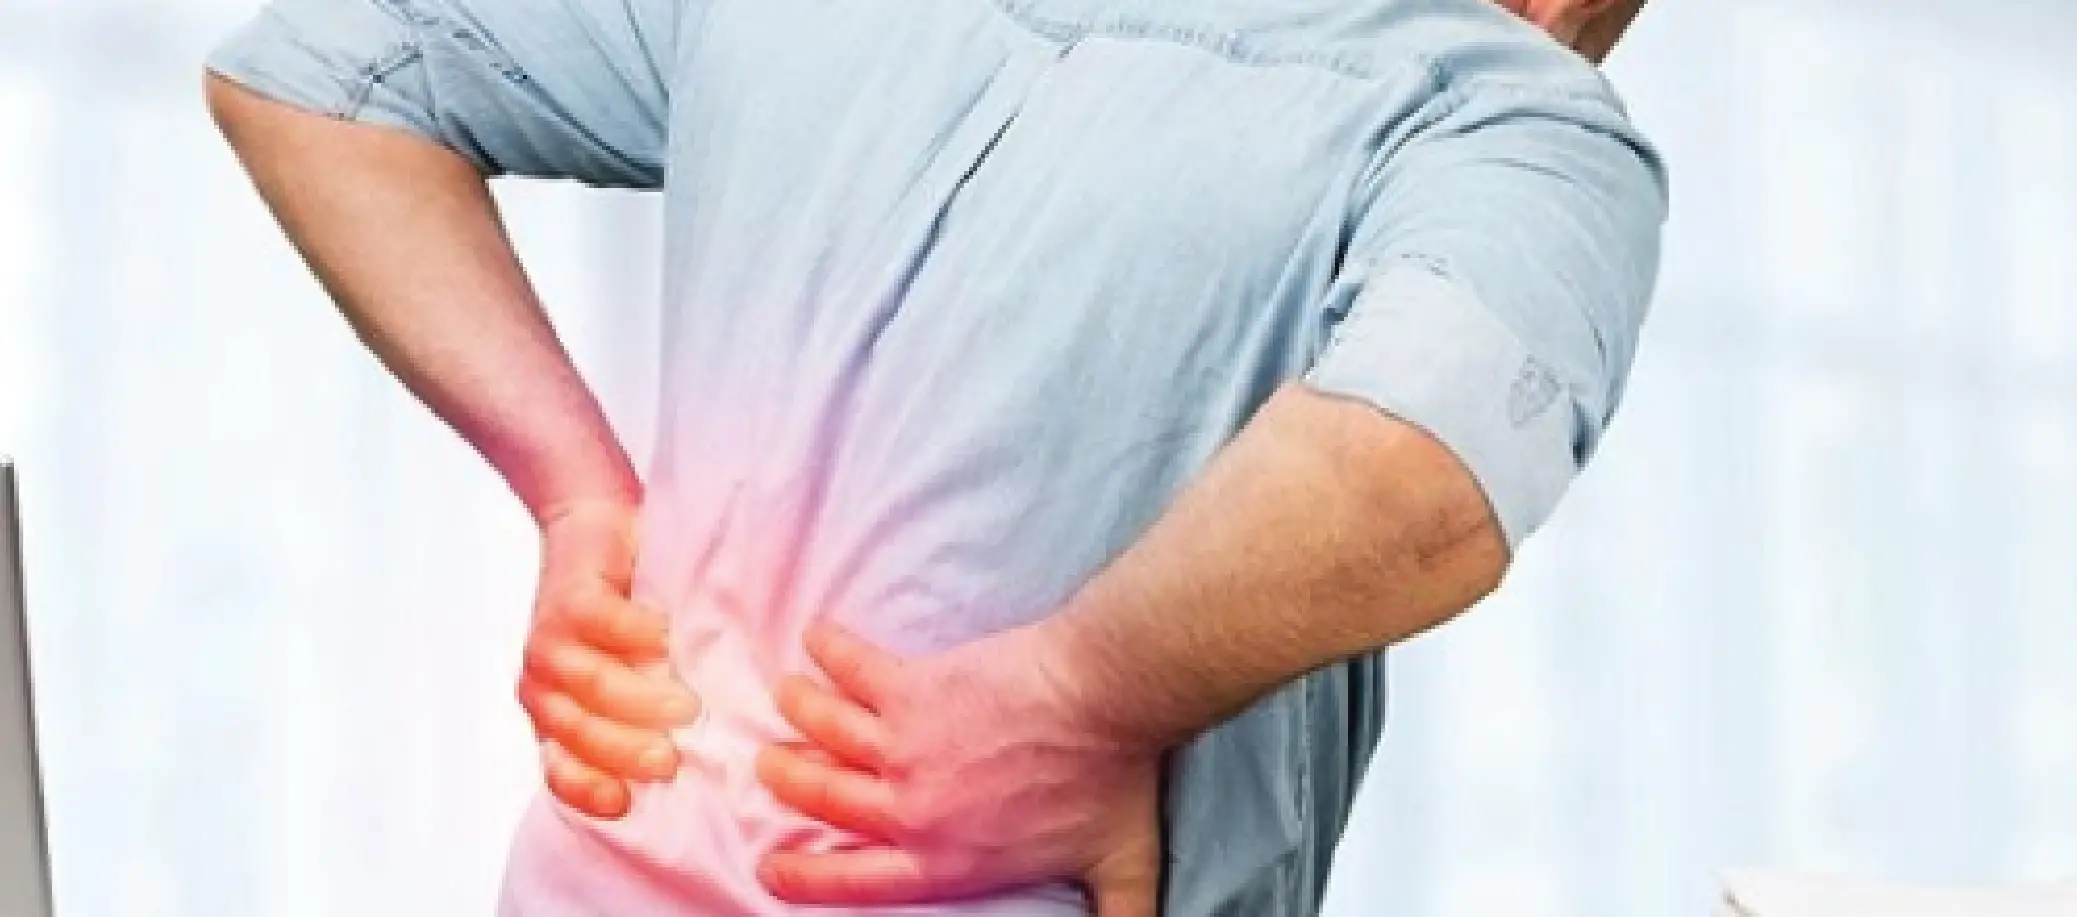 When Should You See a Physician About Back Pain?